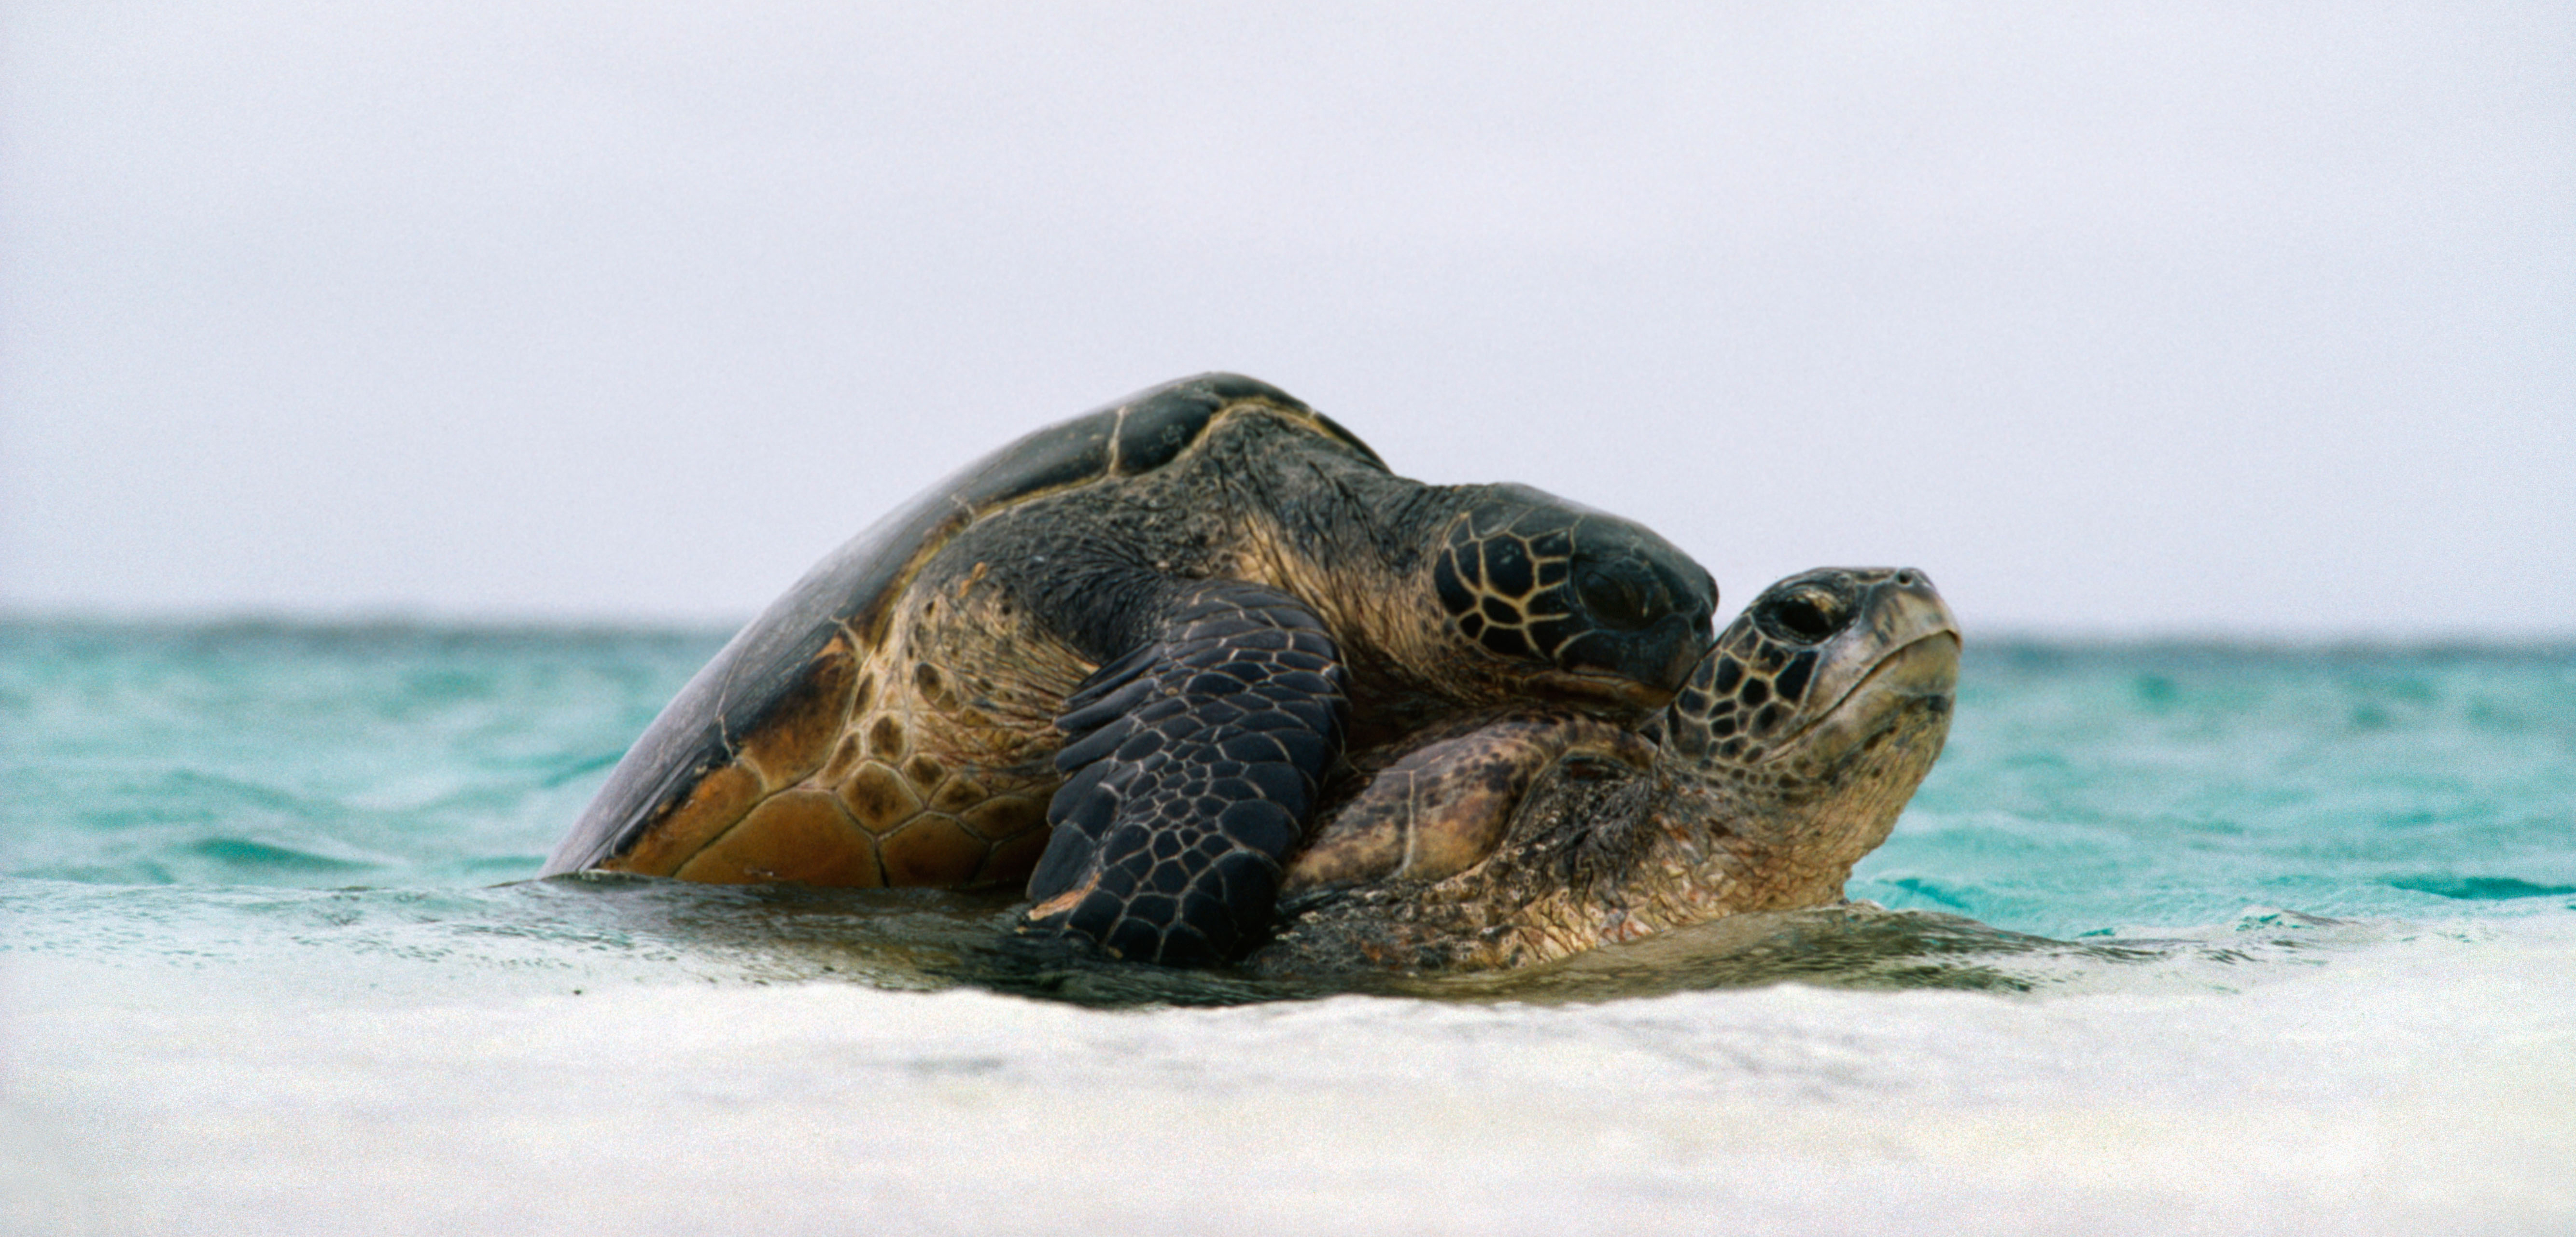 Biting, rubbing, circling, and mounting—green sea turtle sex has it all. Photo by Frans Lanting Studio/Alamy Stock Photo